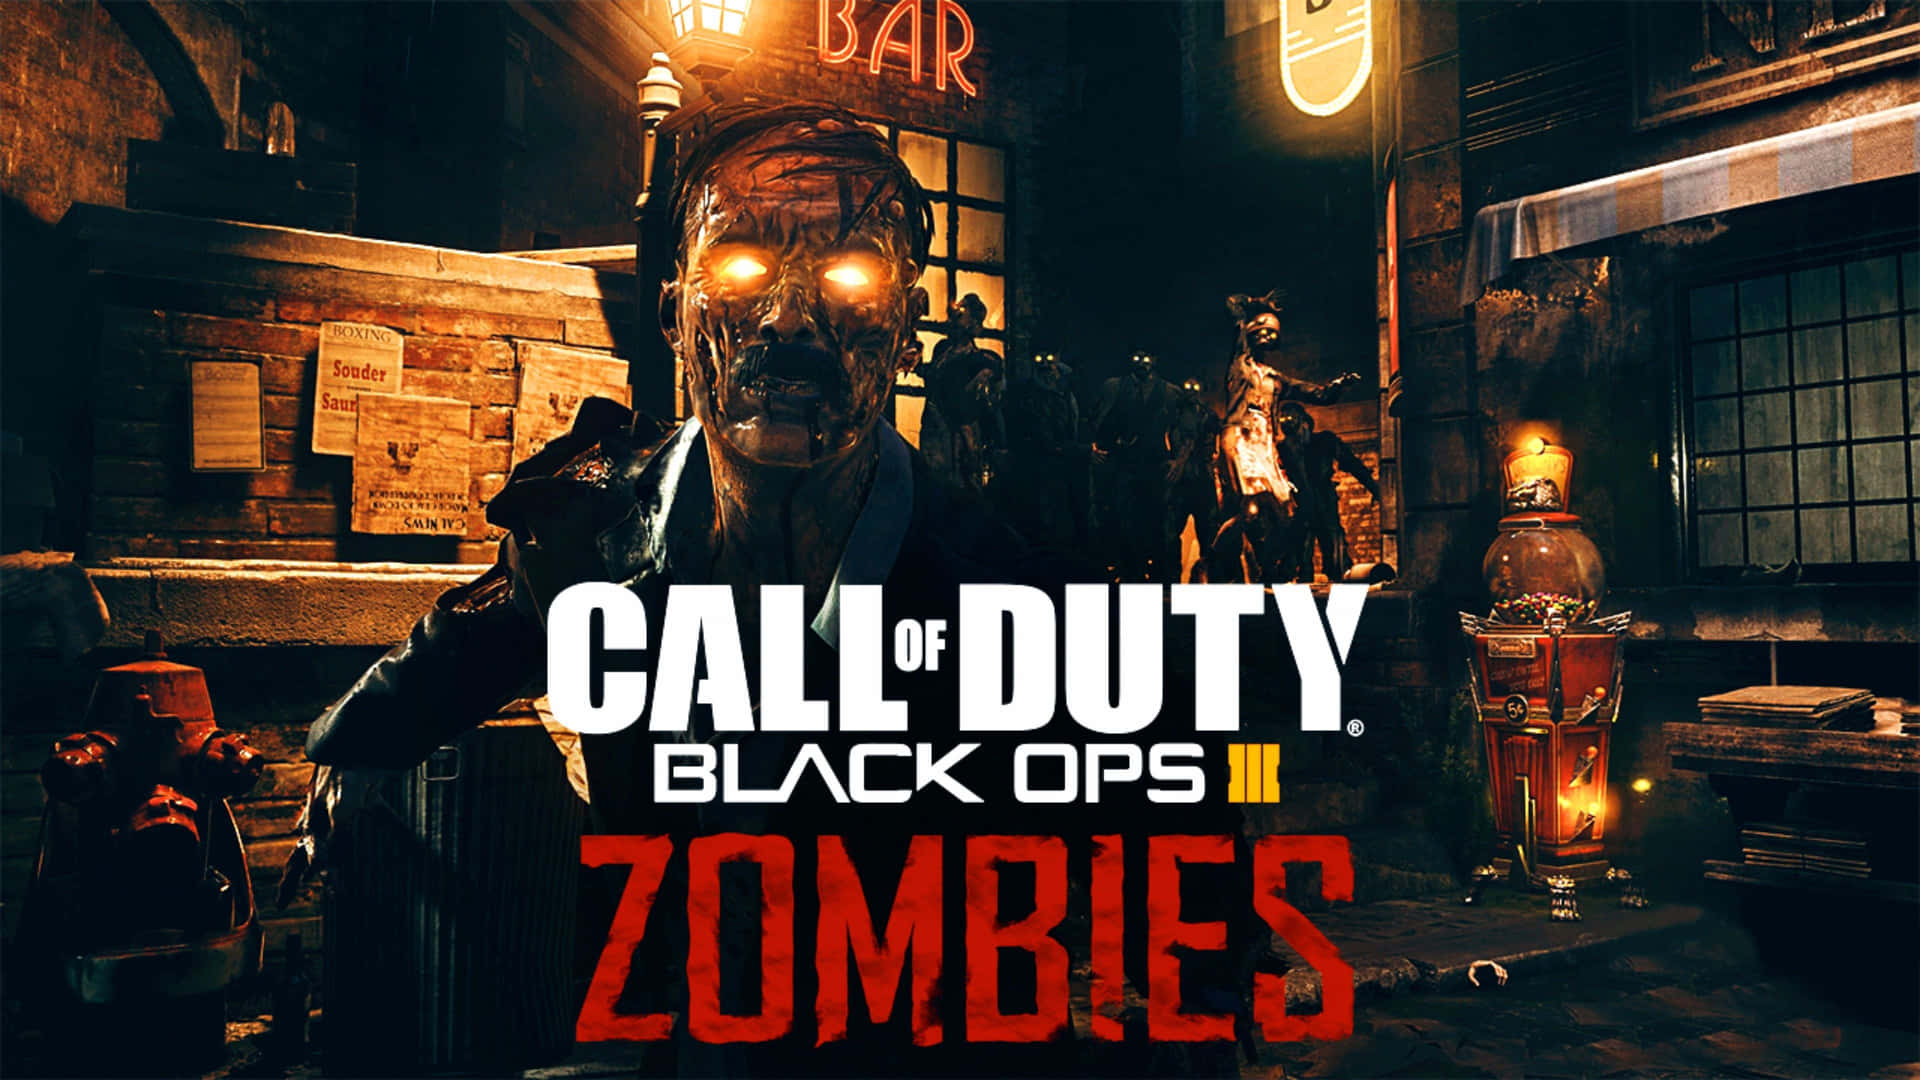 call of duty black ops wallpaper zombies. call of duty black ops zombies